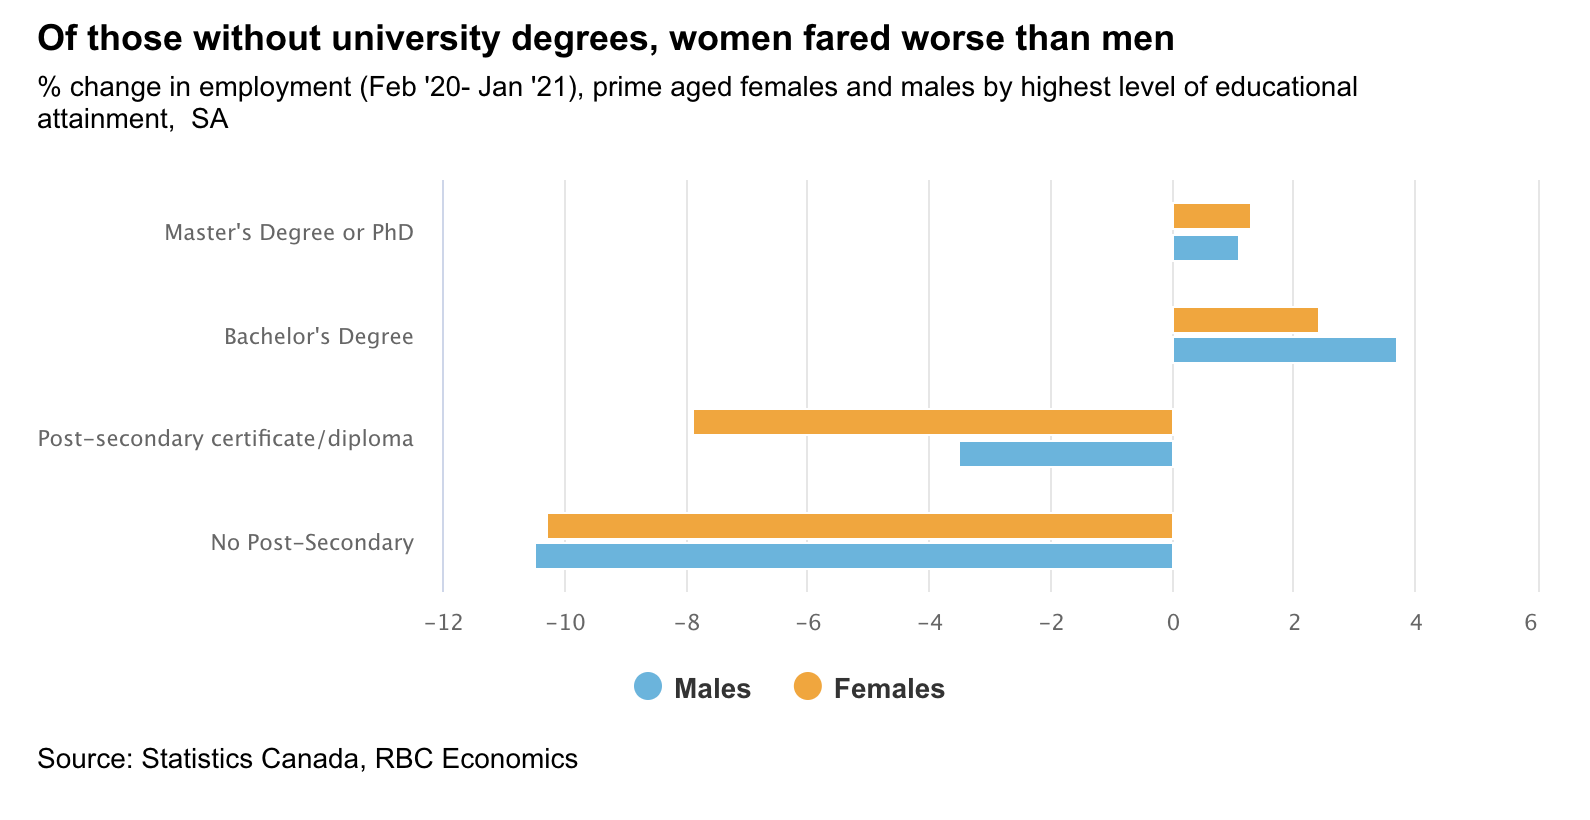 Chart showing of those without university degrees, women fared worse than men